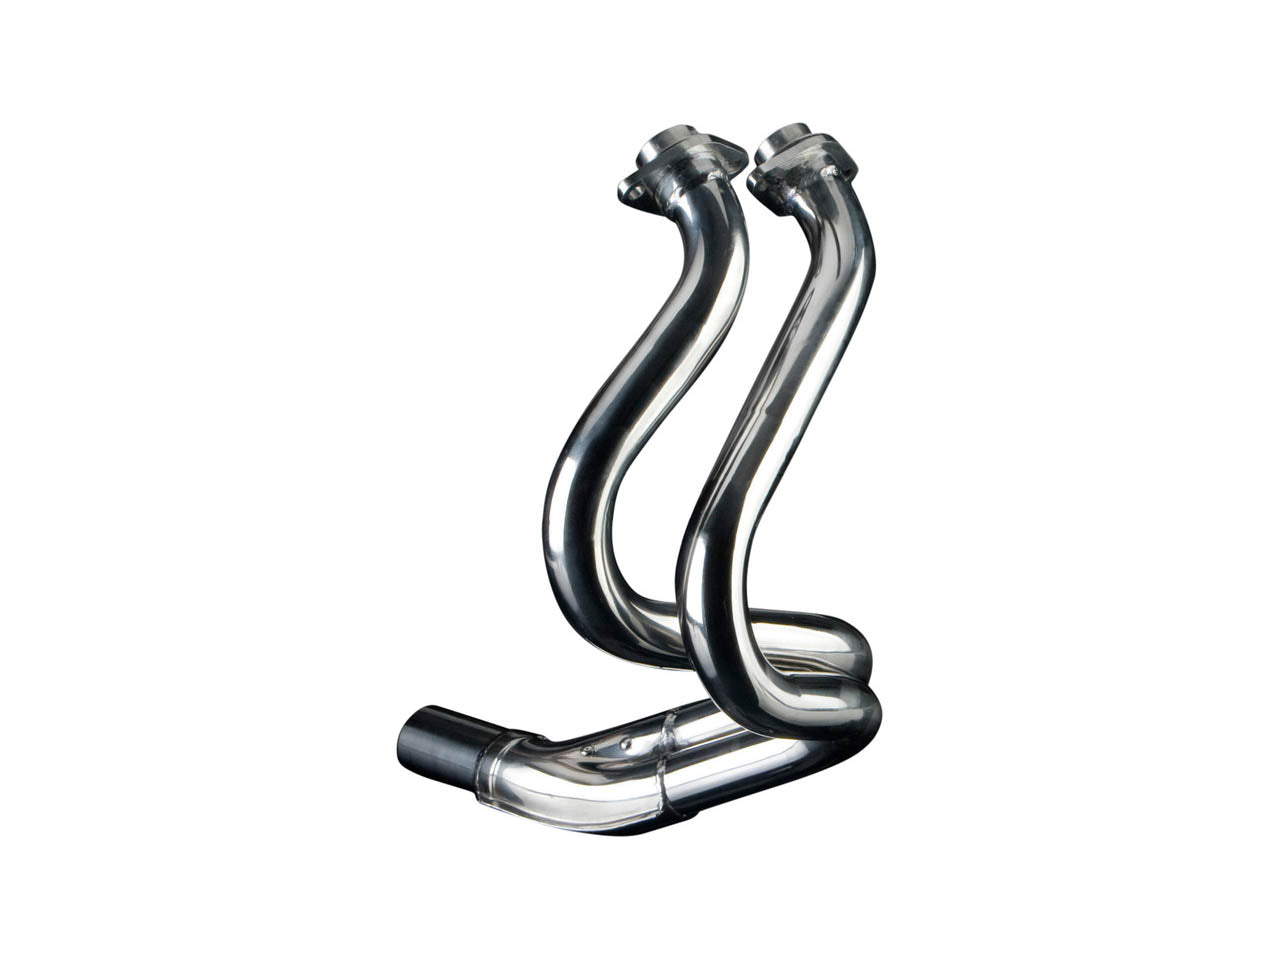 DELKEVIC Kawasaki ER-6N (09/11) Full Exhaust System with SL10 14" Silencer